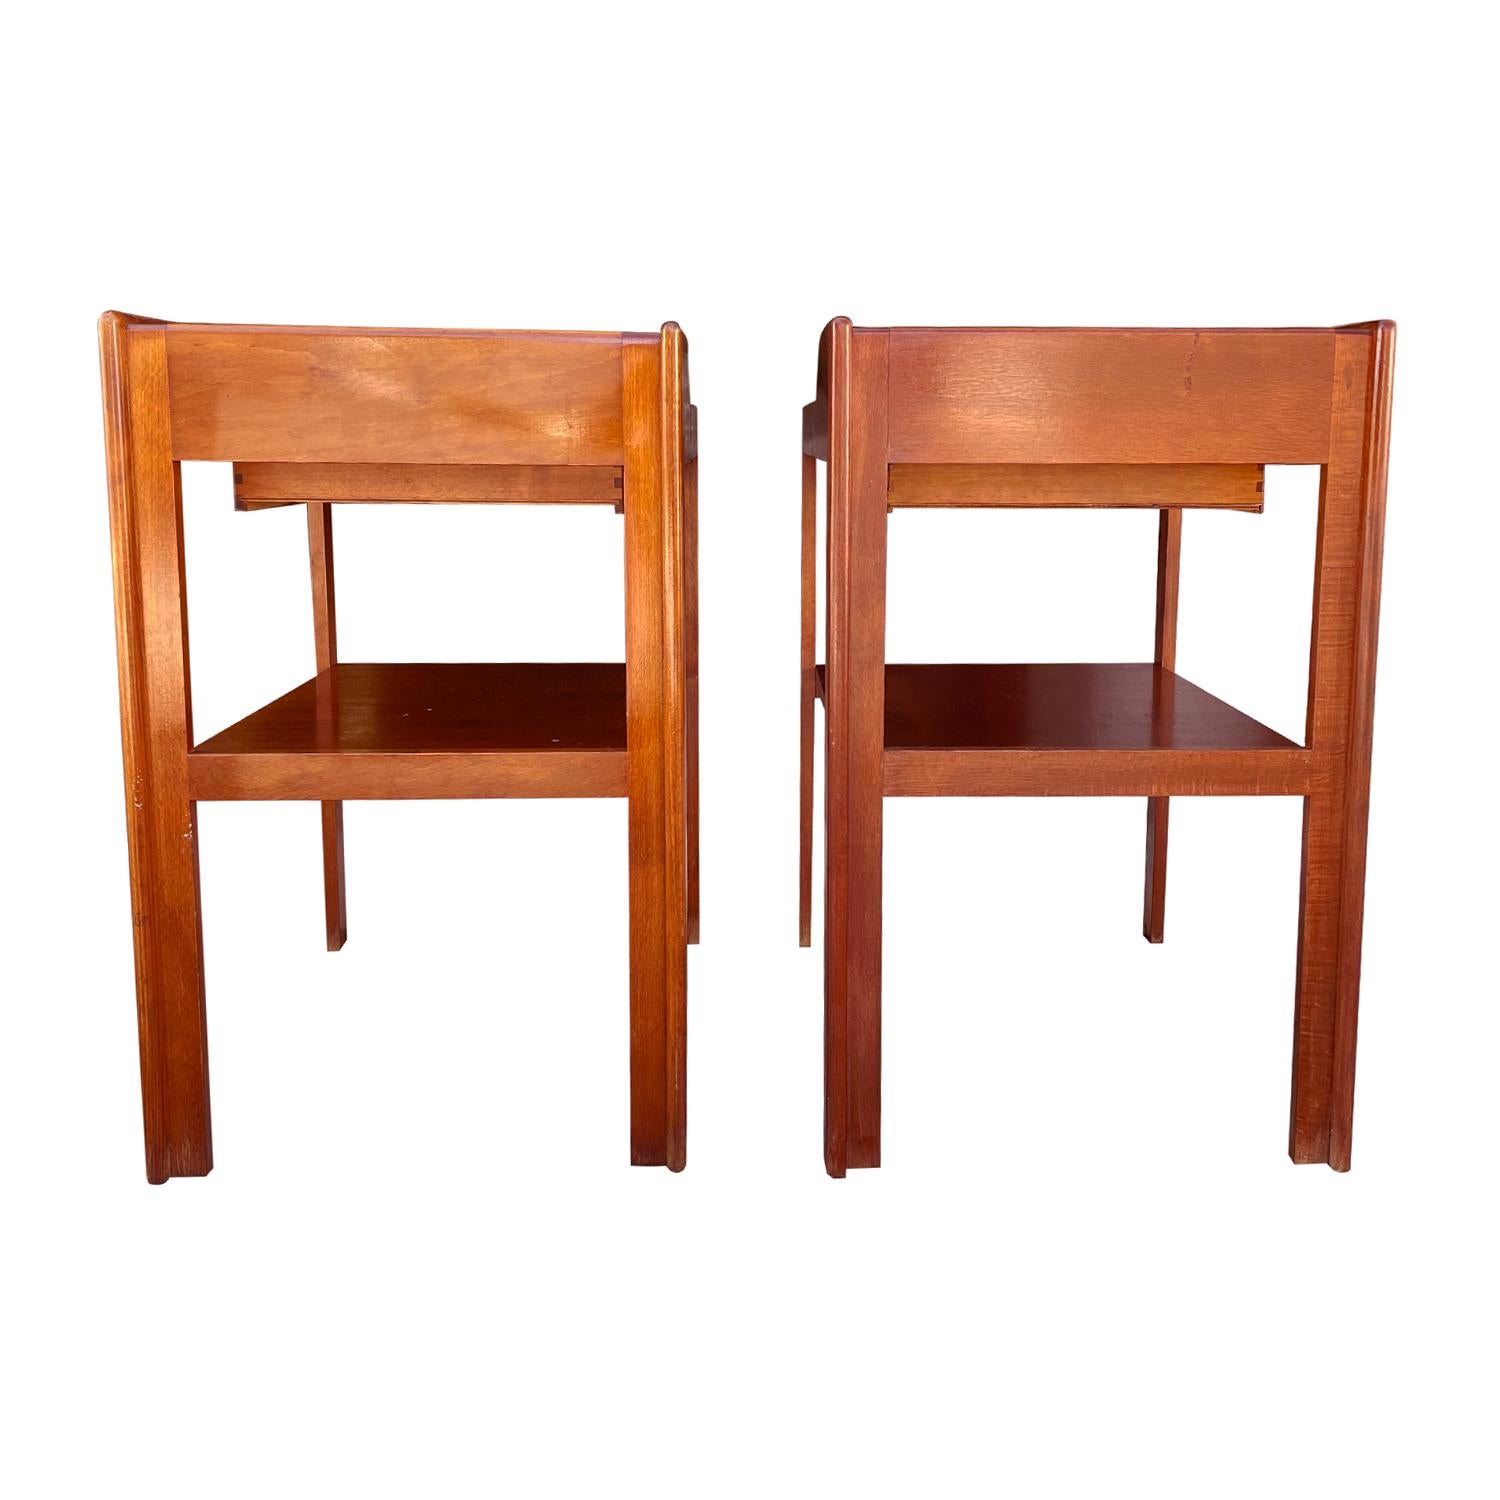 20th Century Swedish Mahogany Nightstands, Bedside Tables by Carl-Axel Acking 3